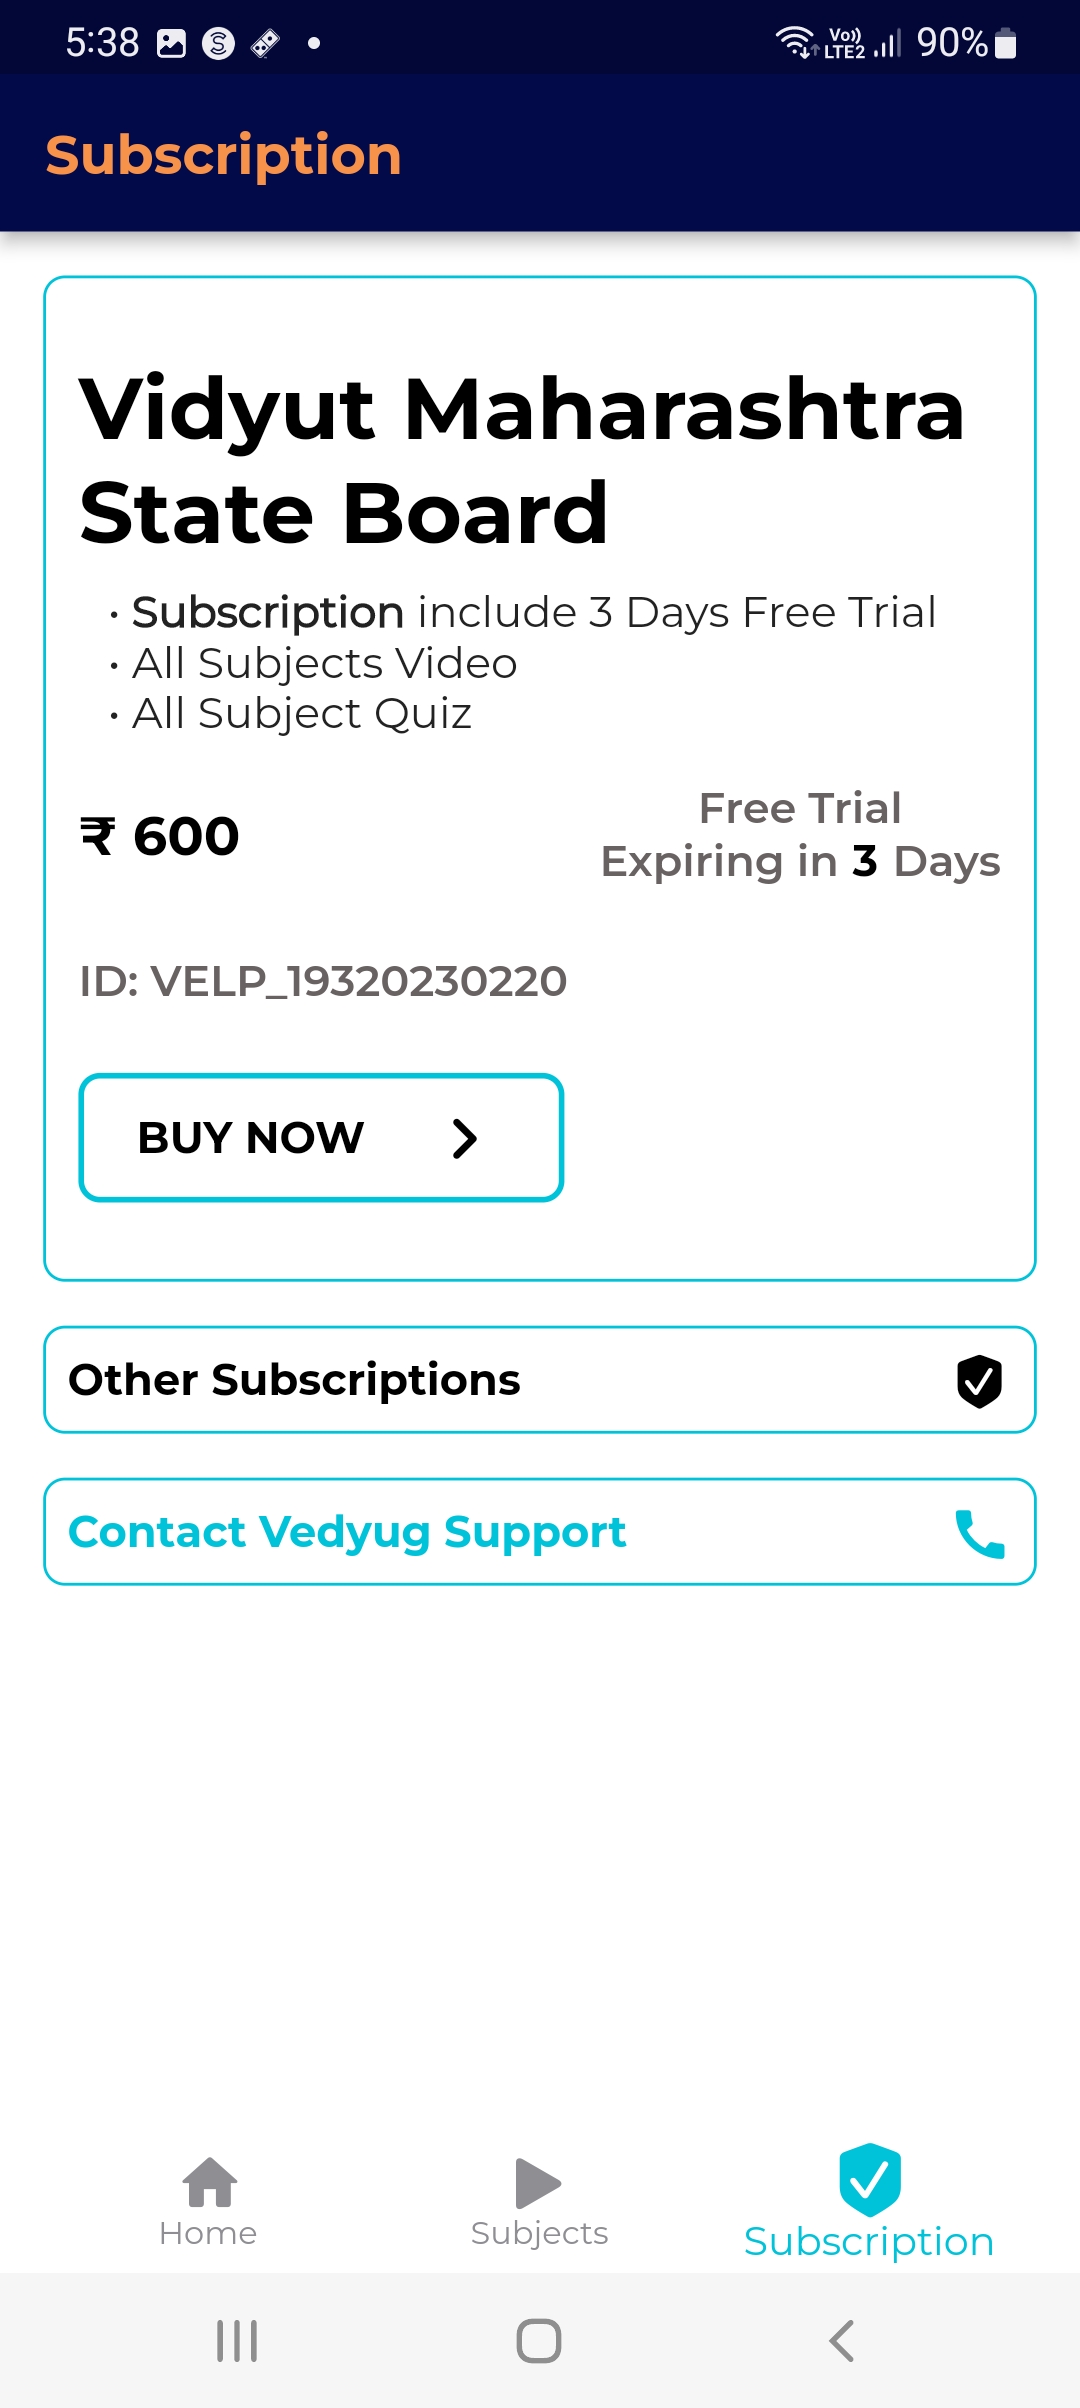 SRNL S IC ARIE |

Subscription

 

Vidyut Maharashtra
State Board

- Subscription include 3 Days Free Trial
- All Subjects Video
- All Subject Quiz

Free Trial
3 600 Expiring in 3 Days
ID: VELP_19320230220

BUY NOW &gt;

Other Subscriptions 9